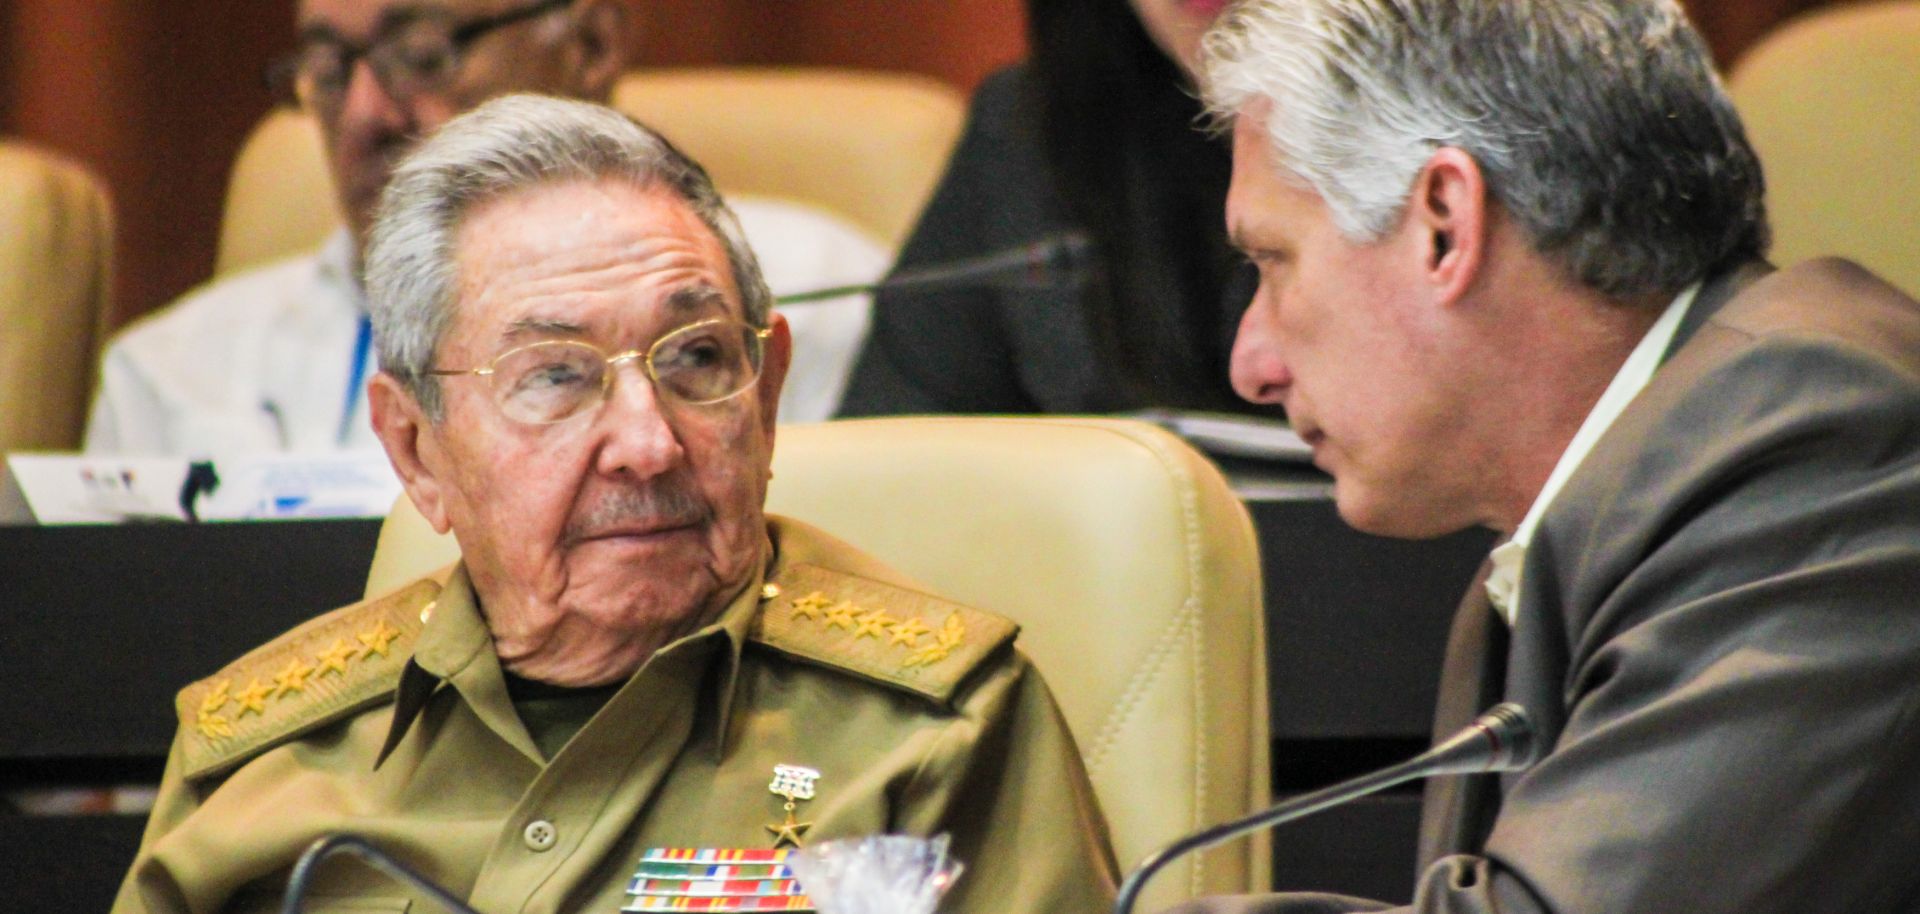 Raul Castro, president of Cuba, talks with Vice President Miguel Diaz-Canel in Havana in 2017.